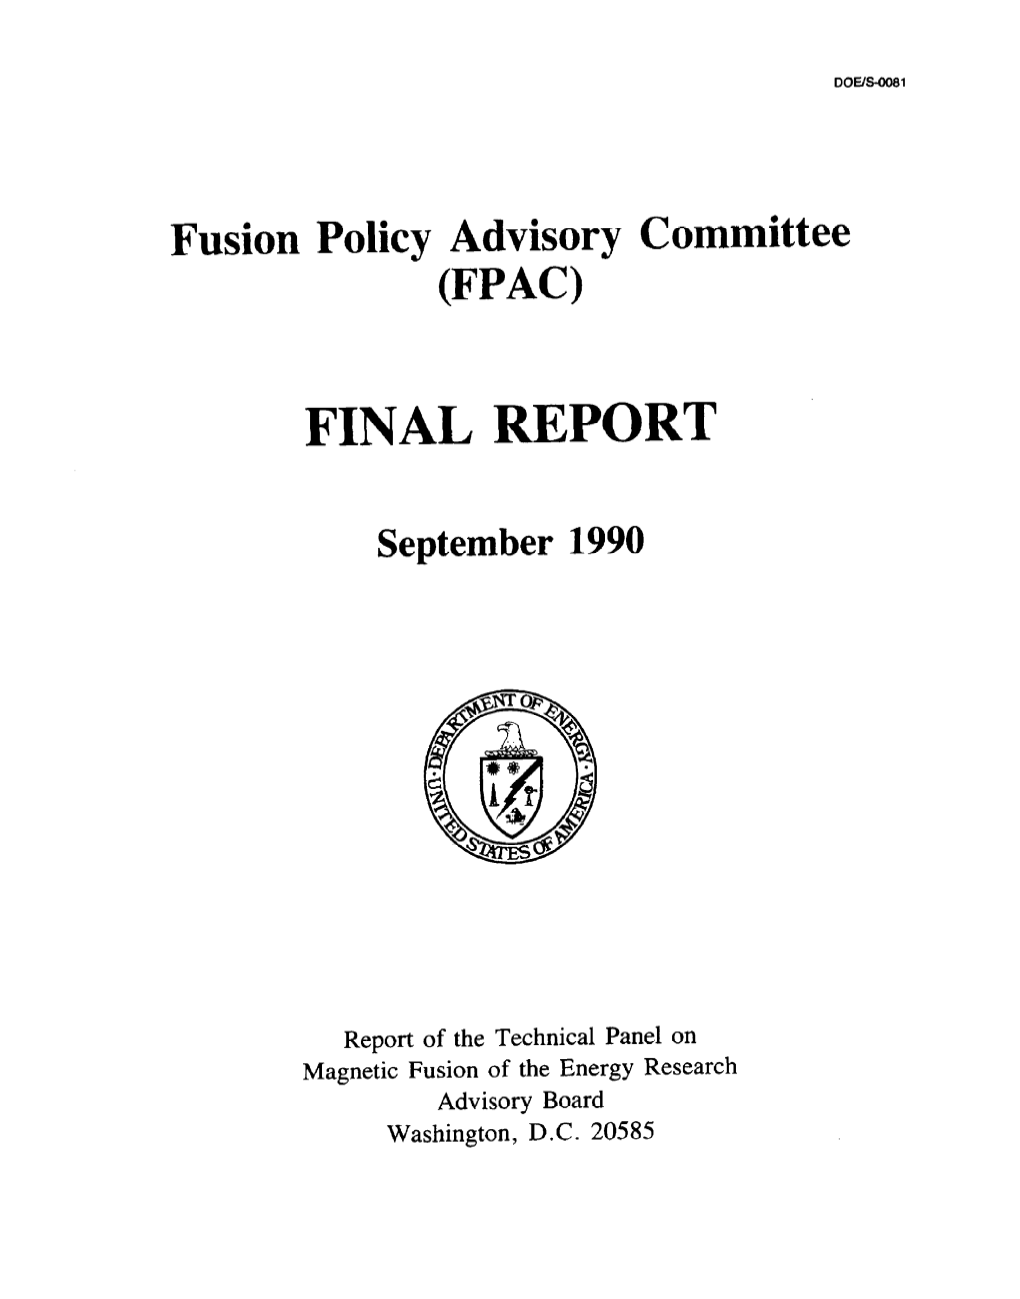 Fusion Policy Advisory Committee (FPAC) Final Report